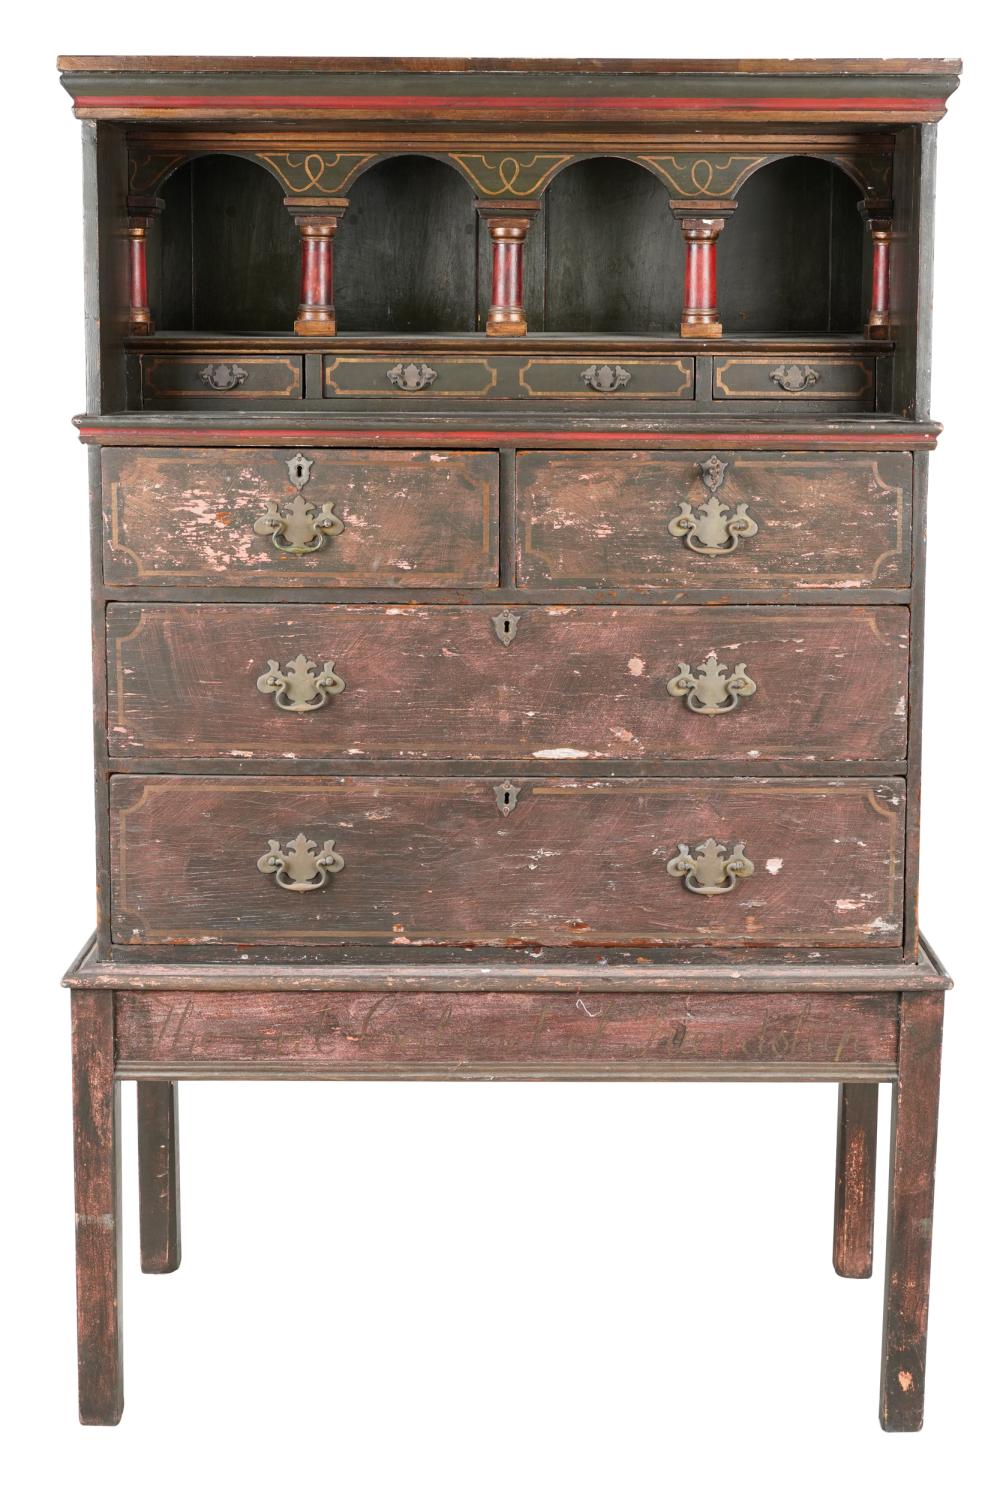 POLYCHROME PAINTED CABINET ON STAND constructed 333dce